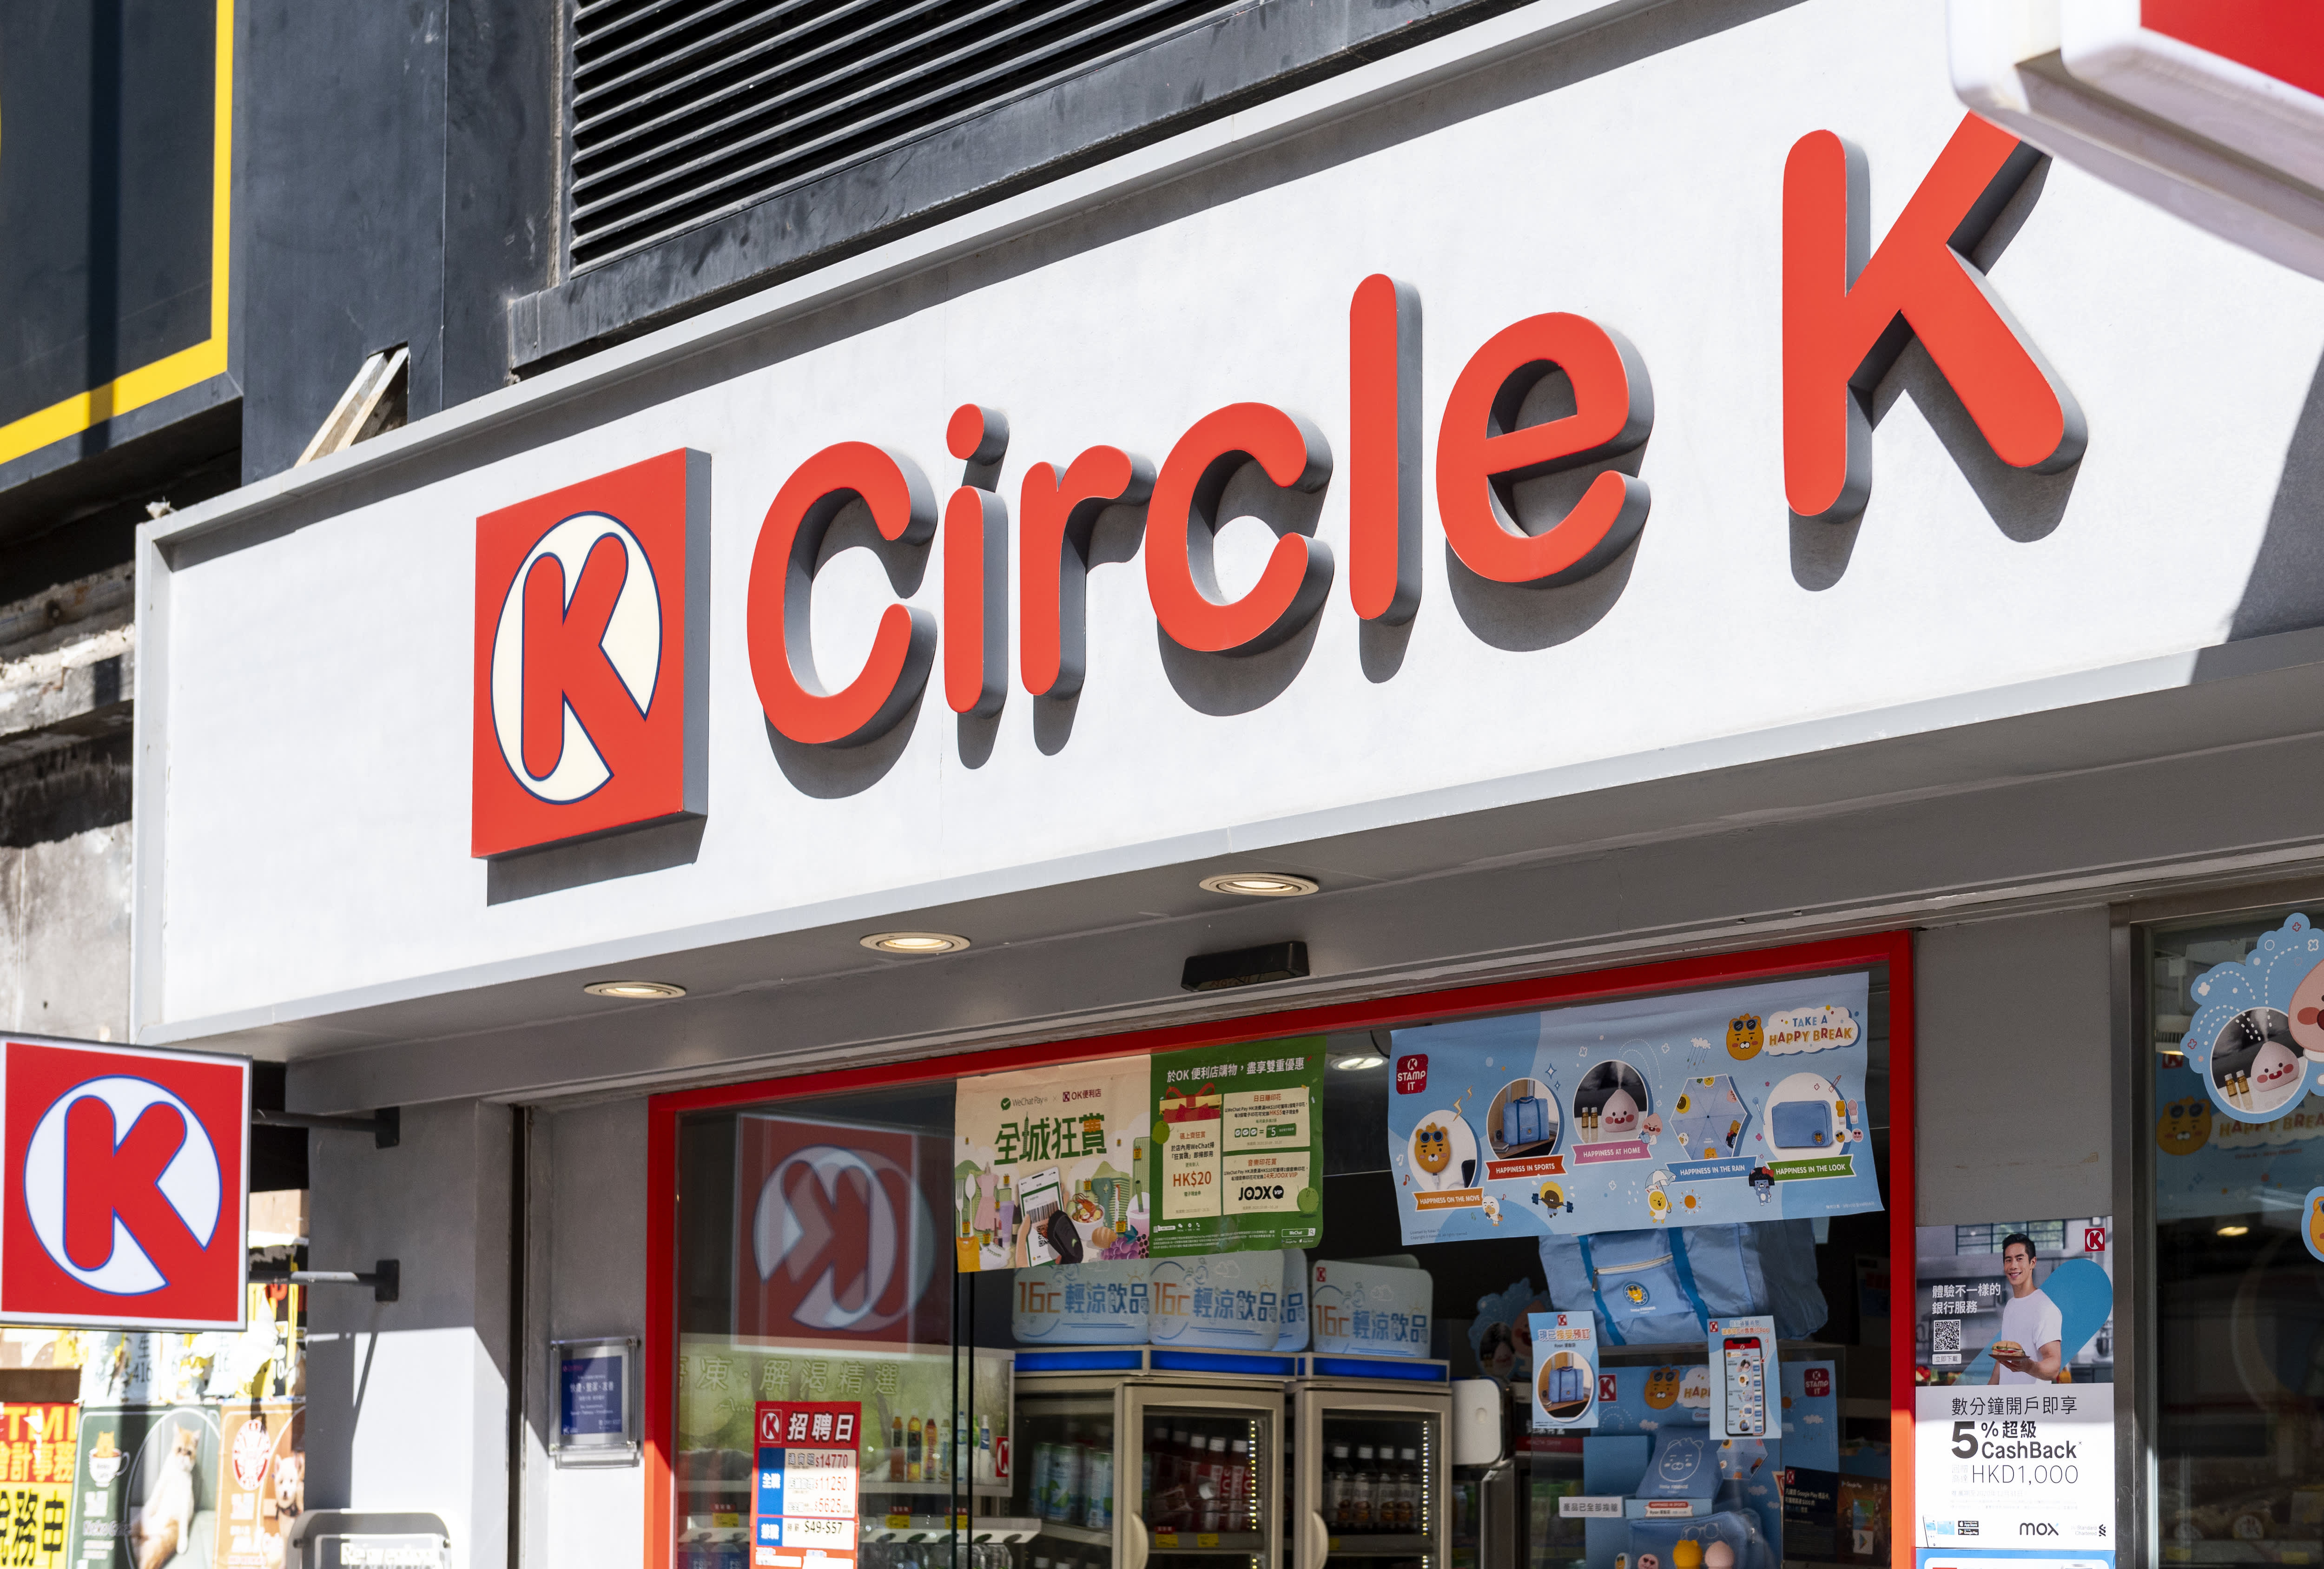 Circle K launches beverage subscription program for .99 per month